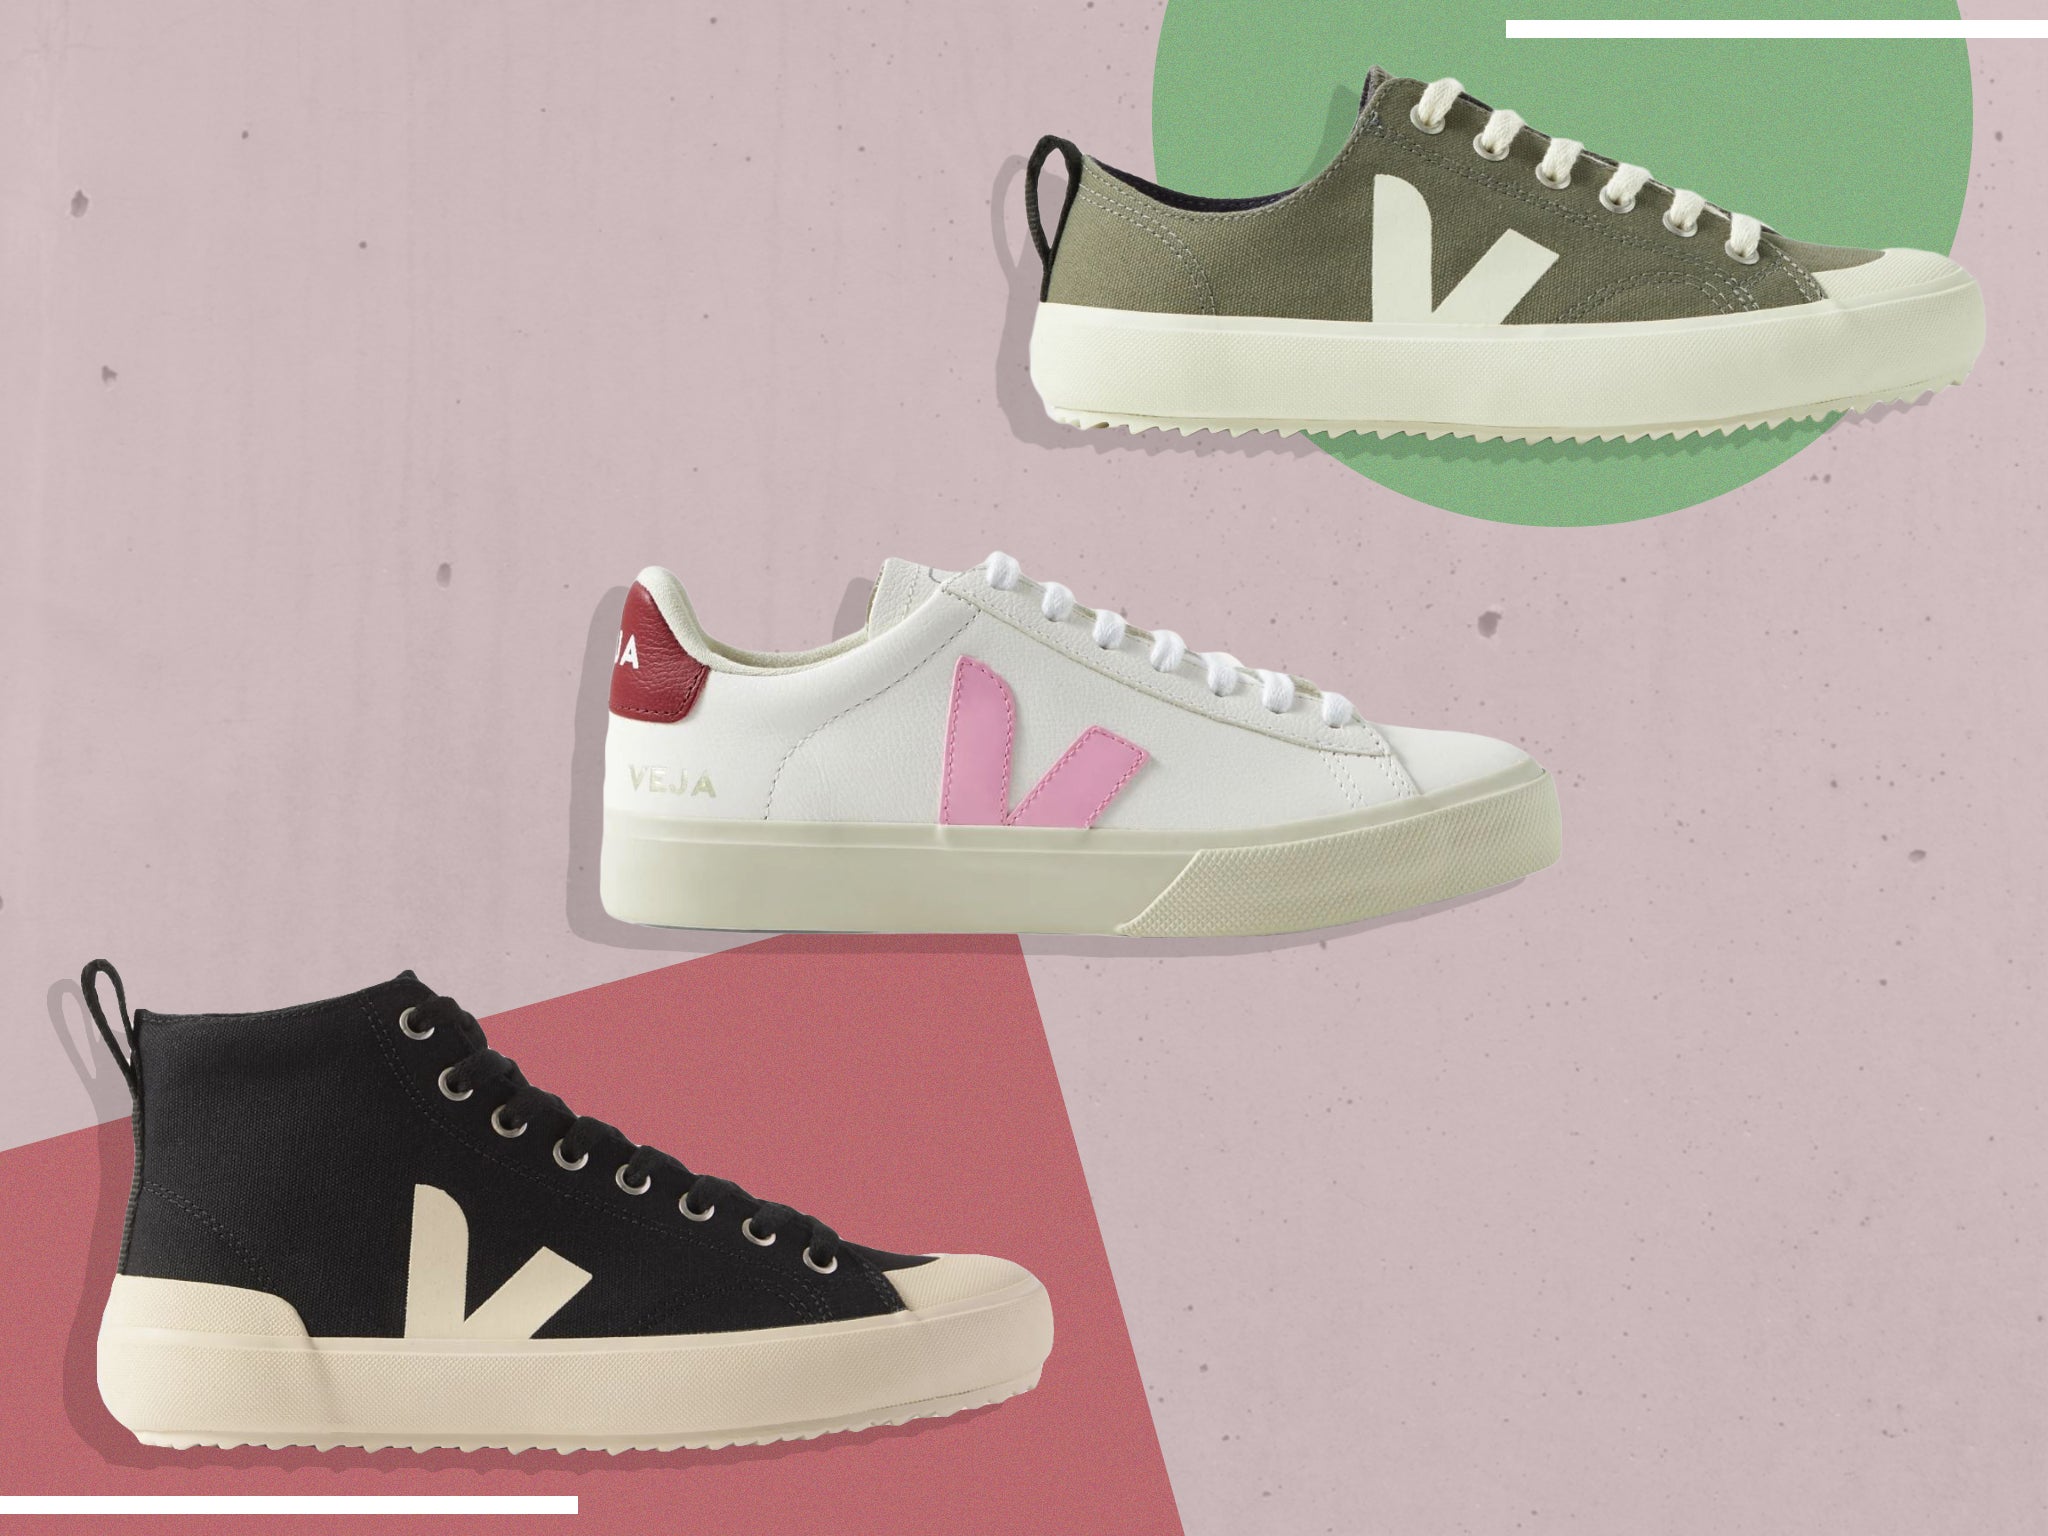 Get yourself a taste of the royal-approved trend with these discounted kicks